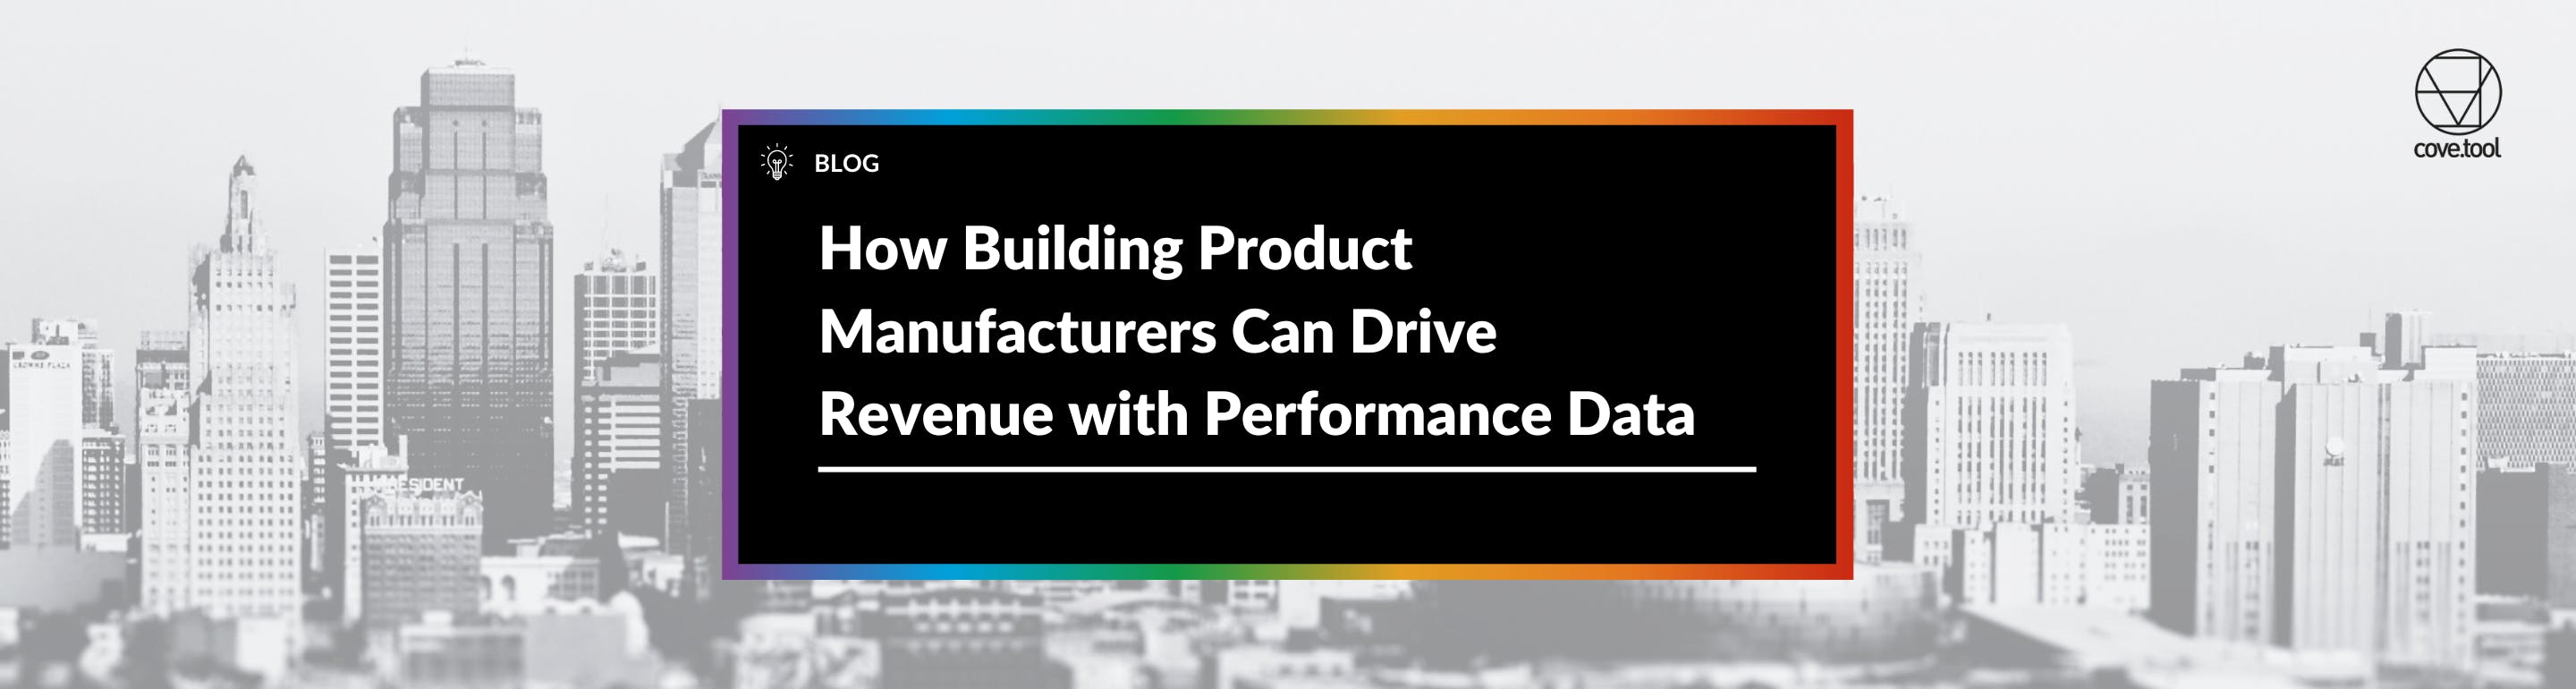 How Building Product Manufacturers Can Drive Revenue with Performance Data  